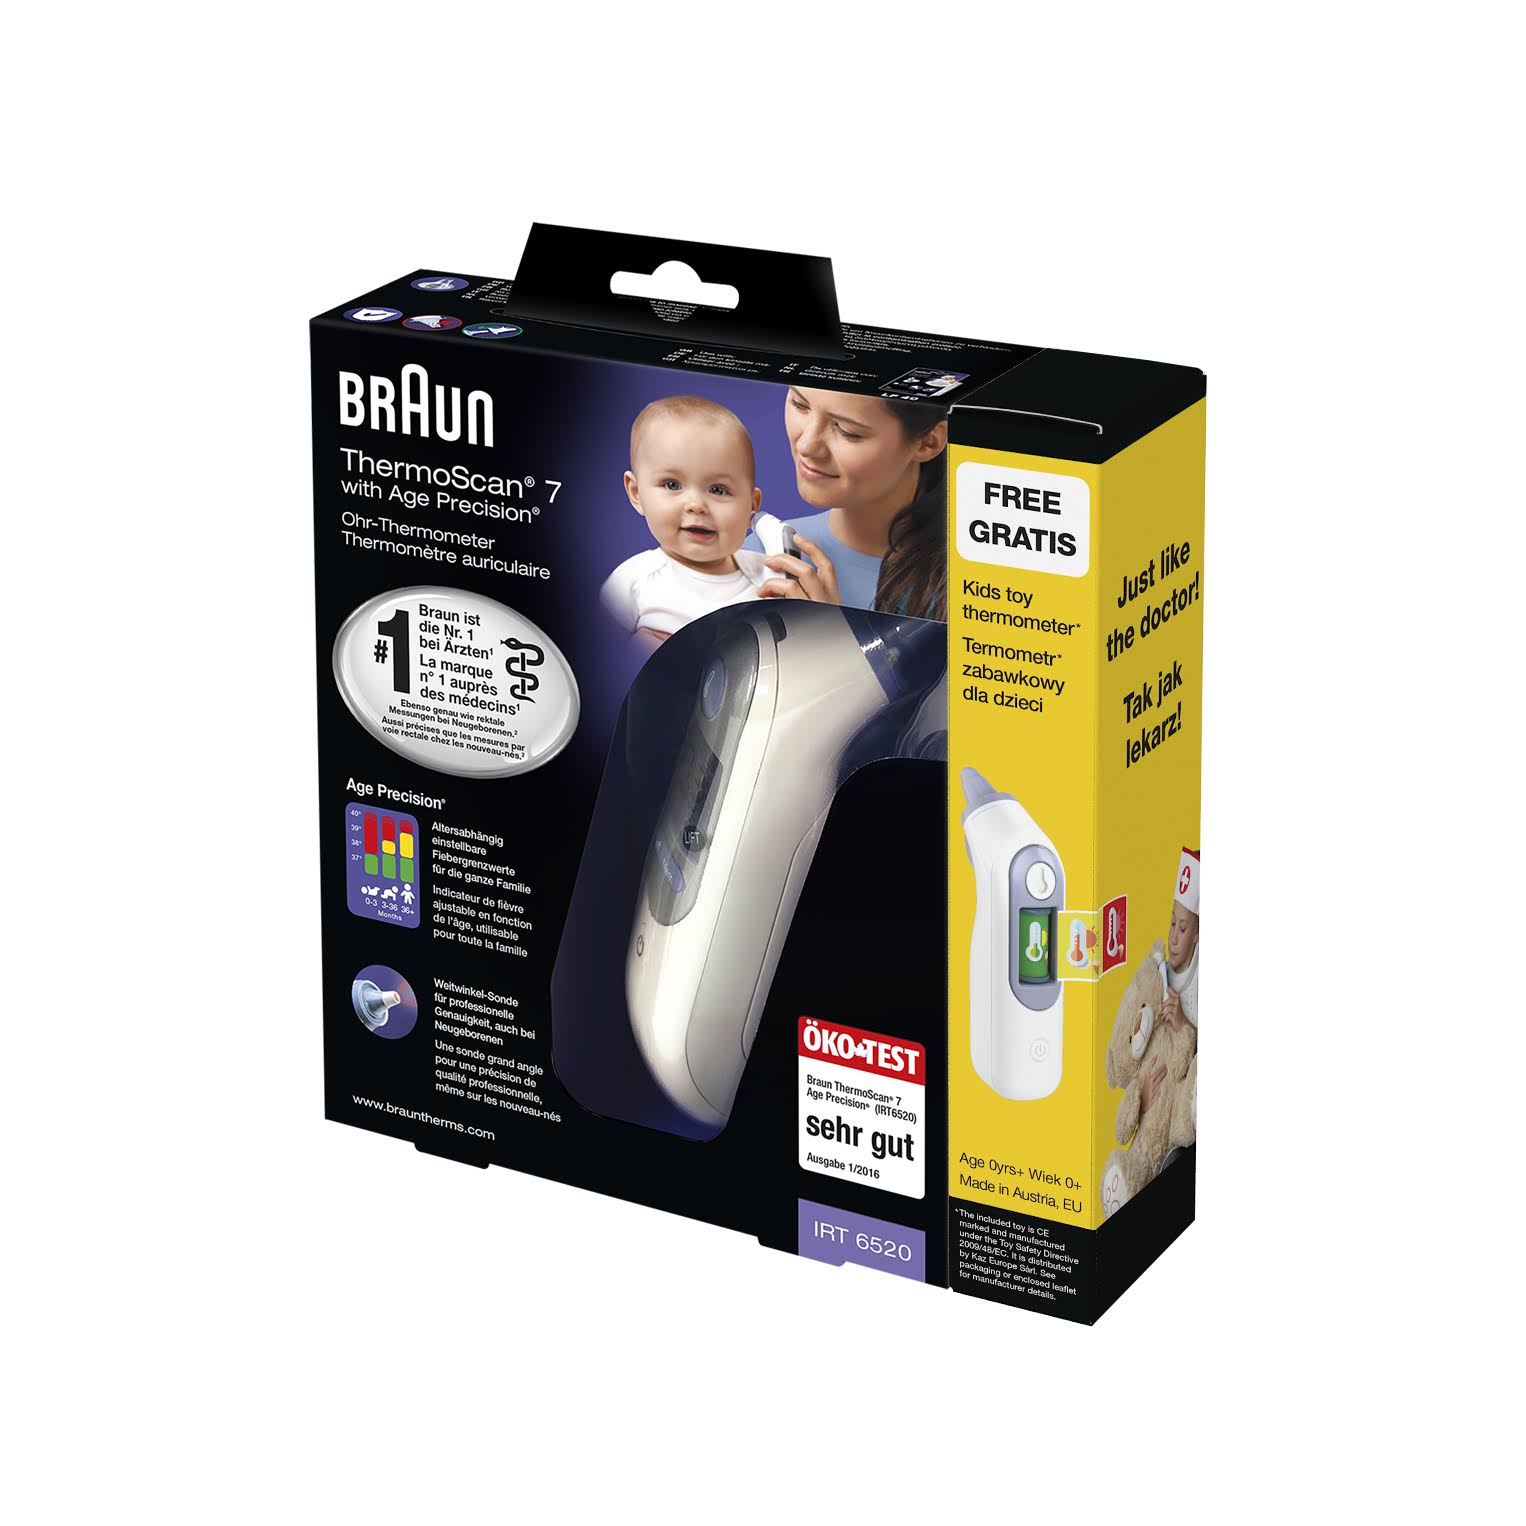 Braun Thermoscan 7 6520 Ear Thermometer